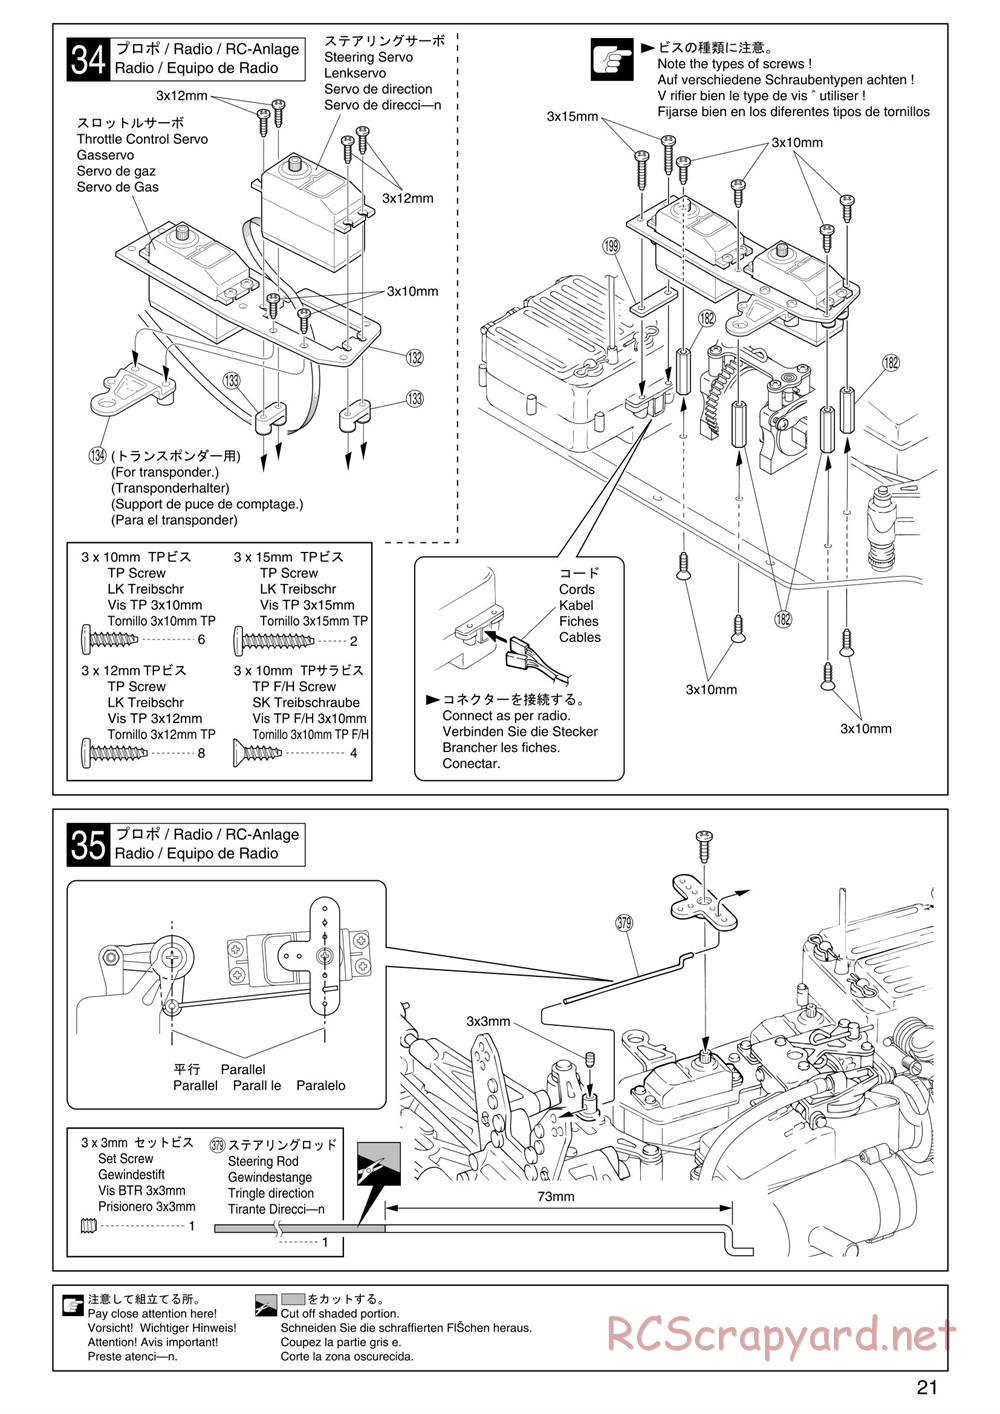 Kyosho - Inferno ST (2005) - Manual - Page 21